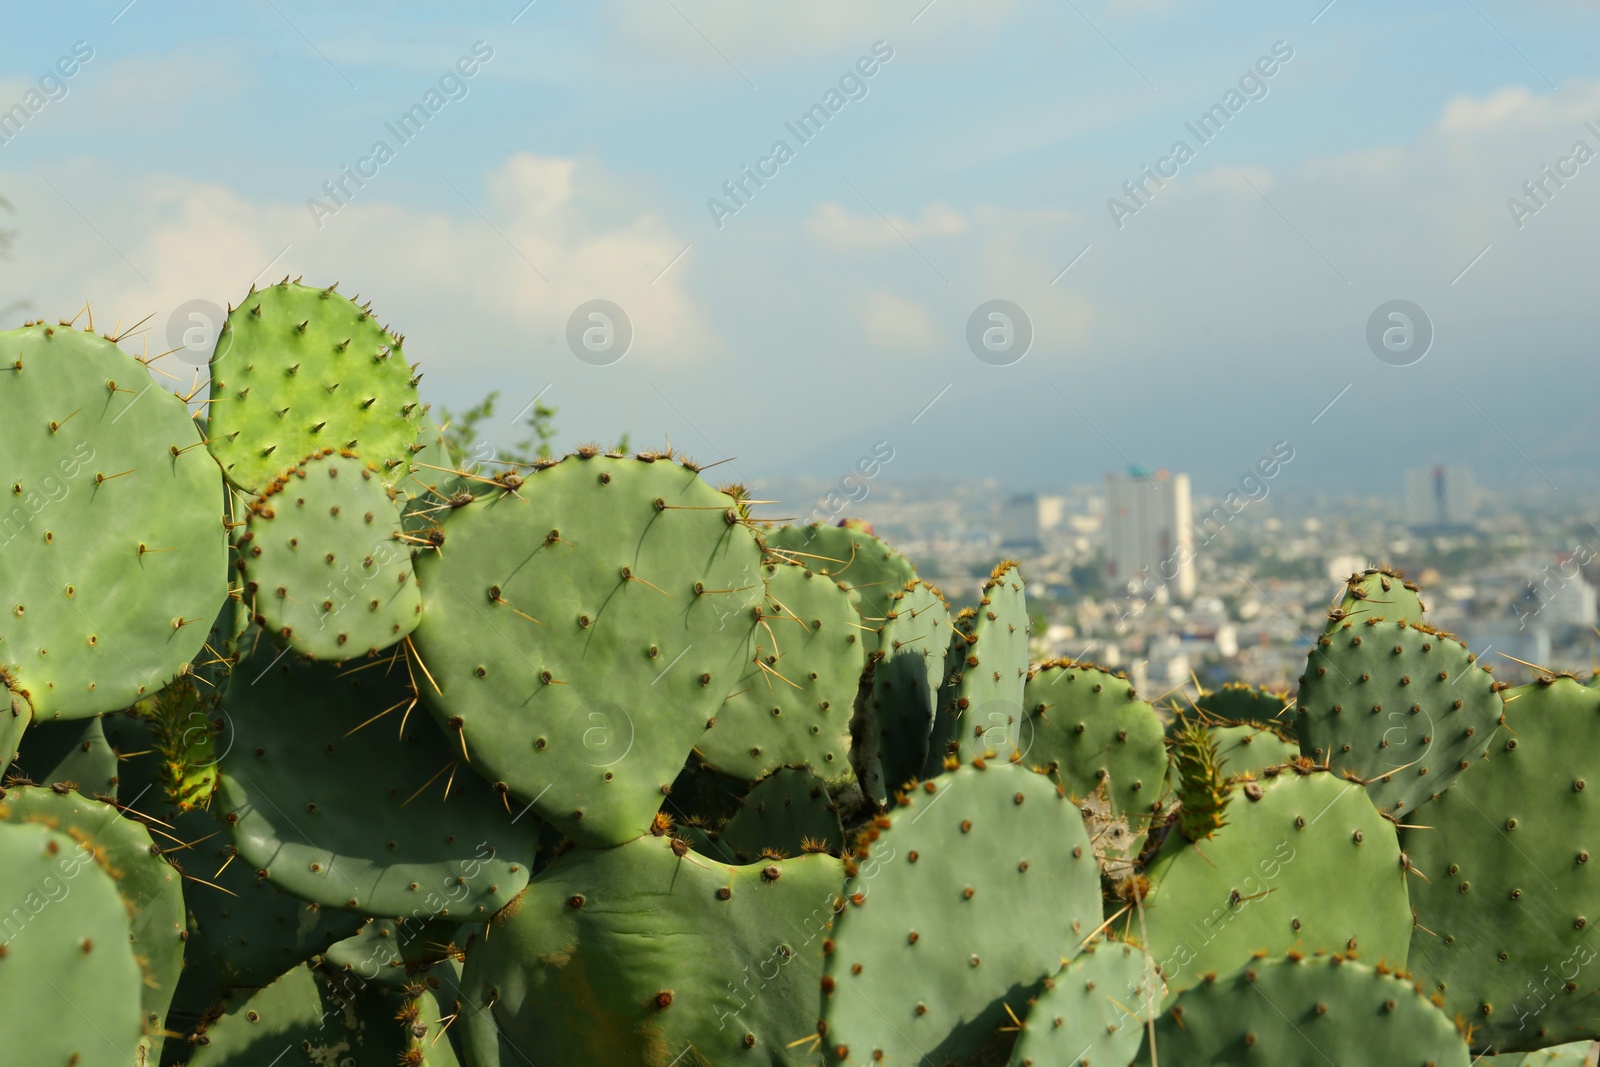 Photo of Beautiful view of cactuses with thorns against city and many buildings under cloudy sky, closeup